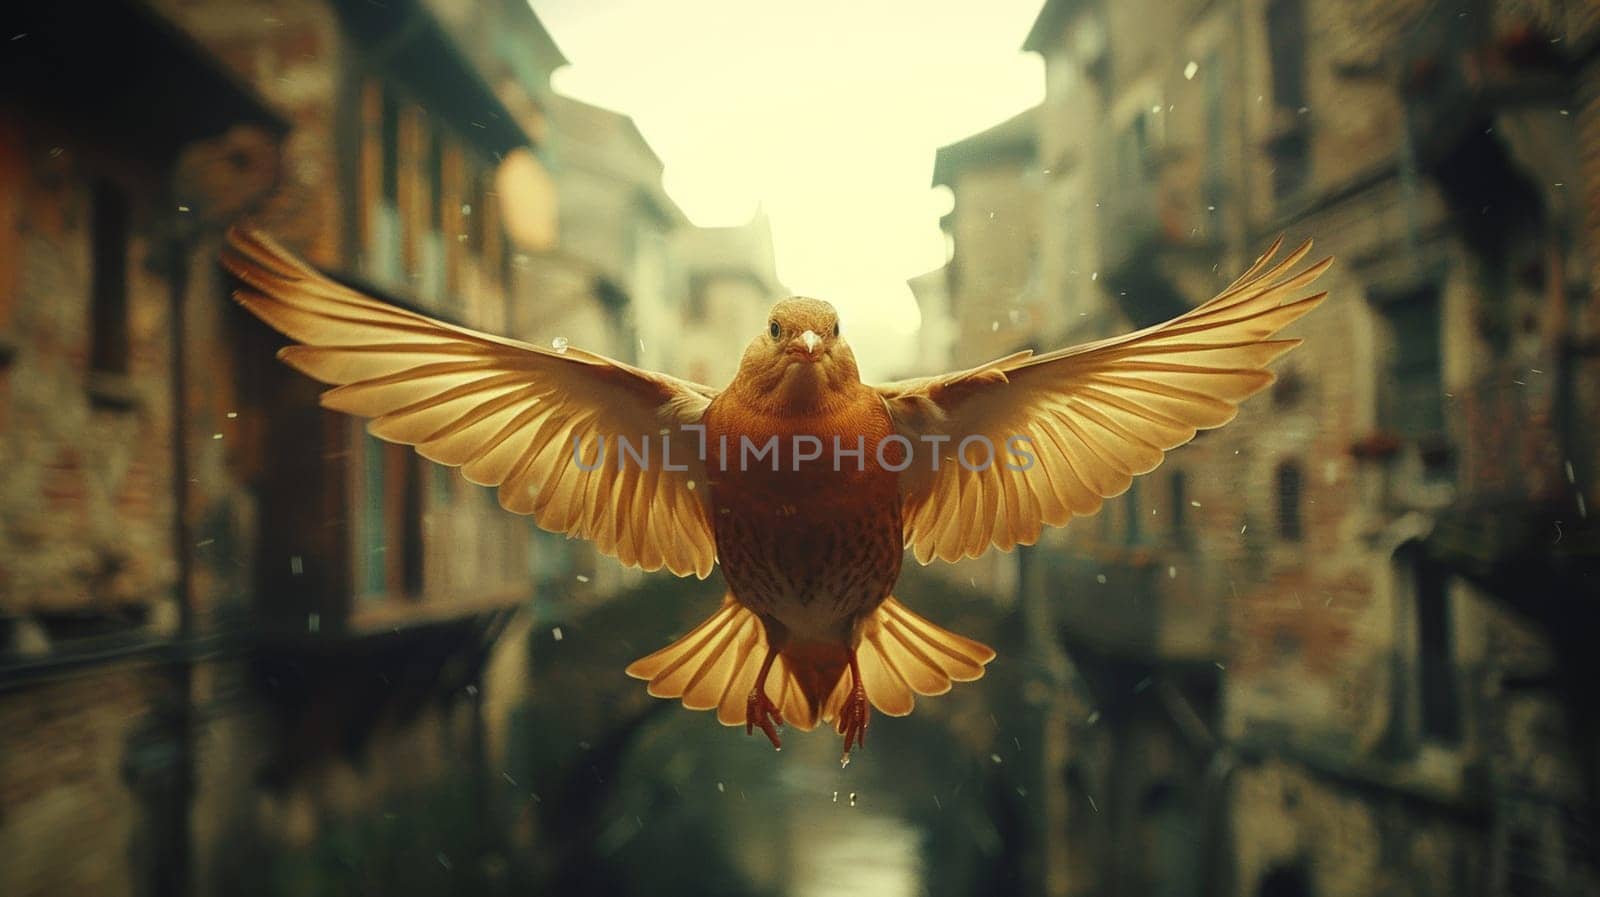 A bird flying over a city street with buildings in the background, AI by starush